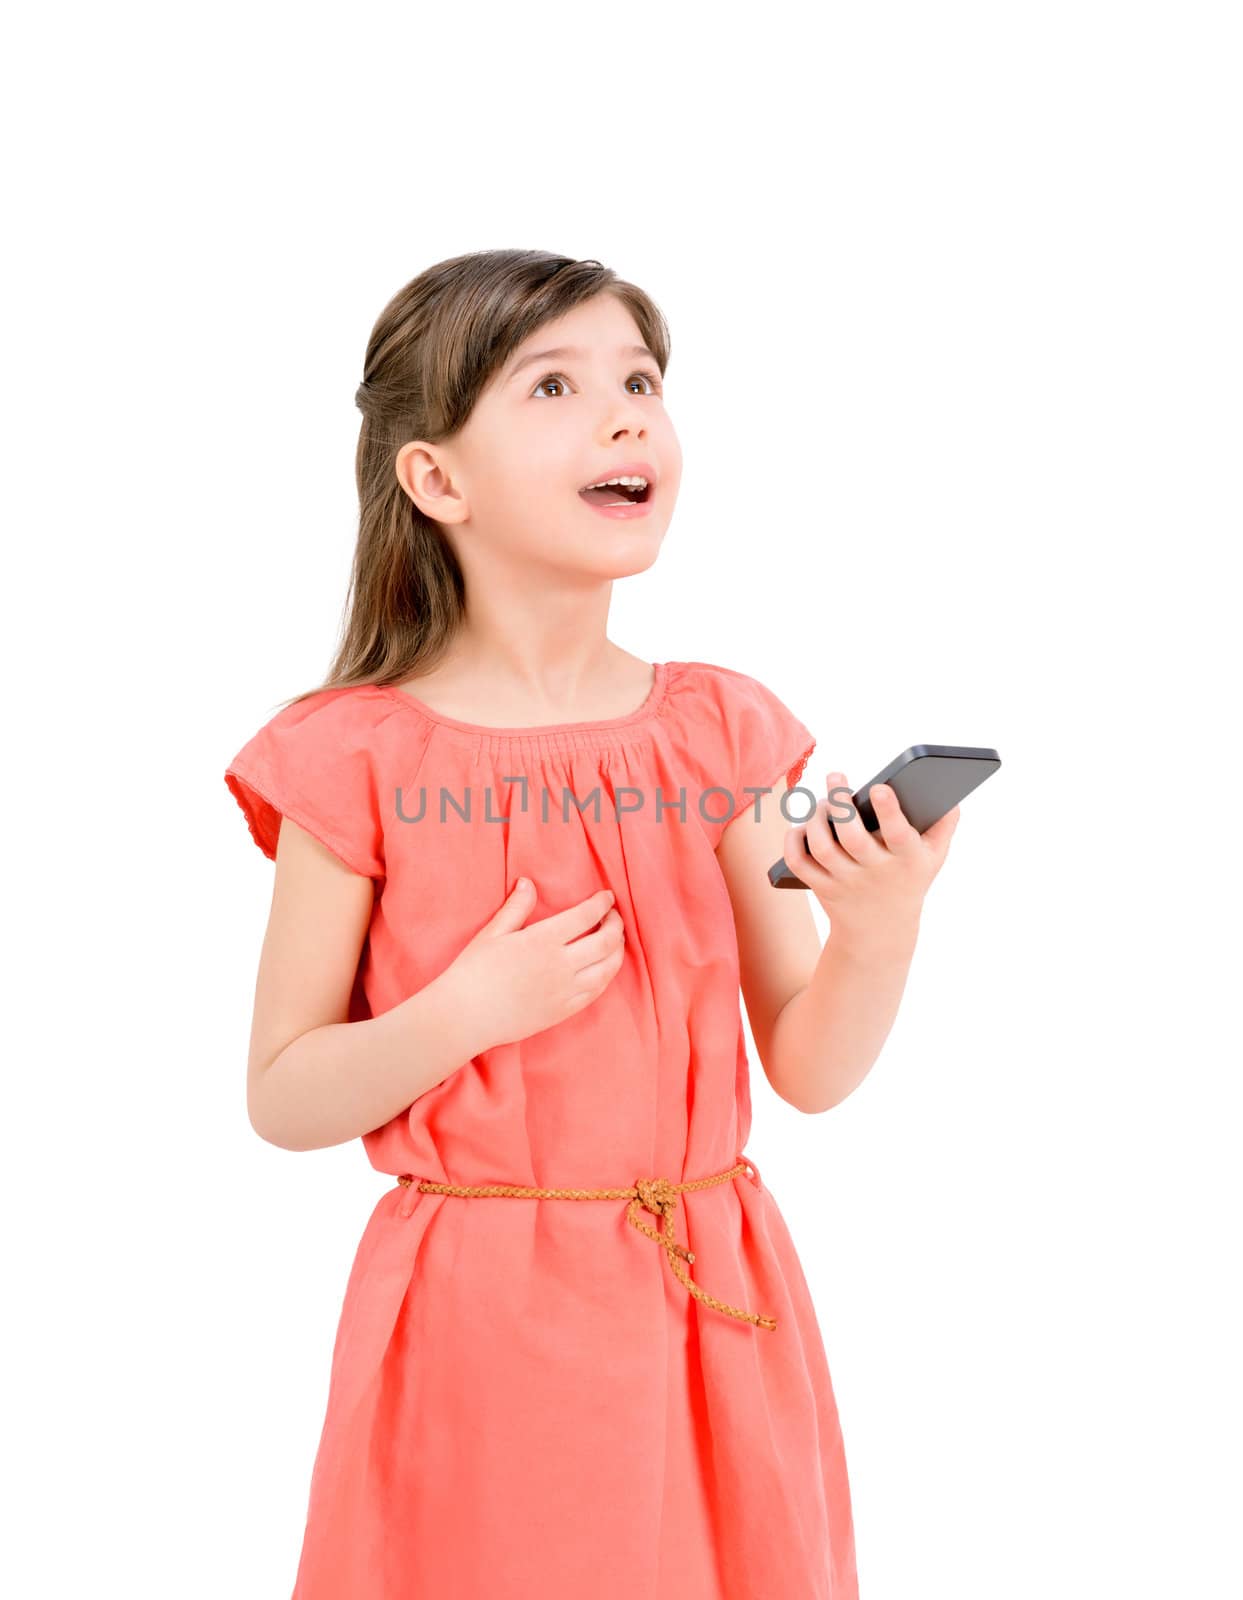 Inspired cute little girl in red dress looking up and holding in her hand mobile phone. Isolated on white background.